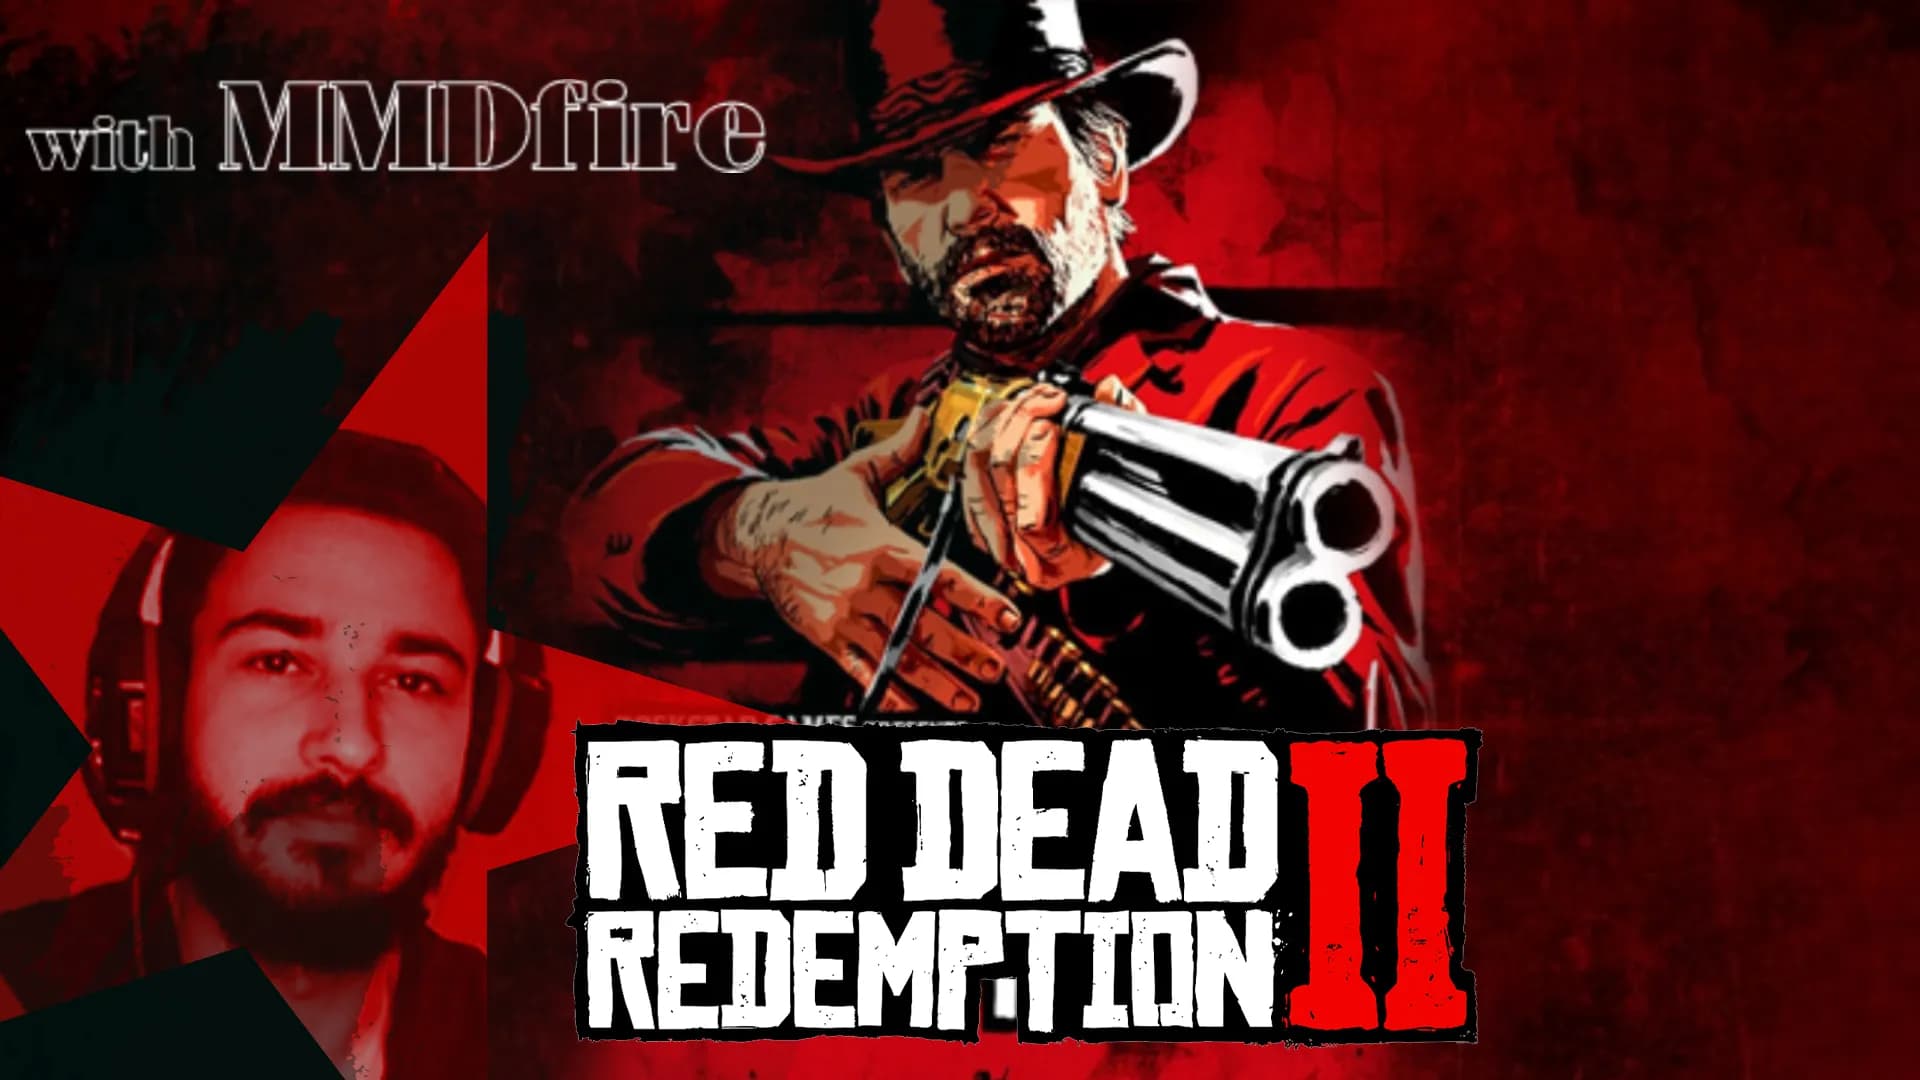 Red dead